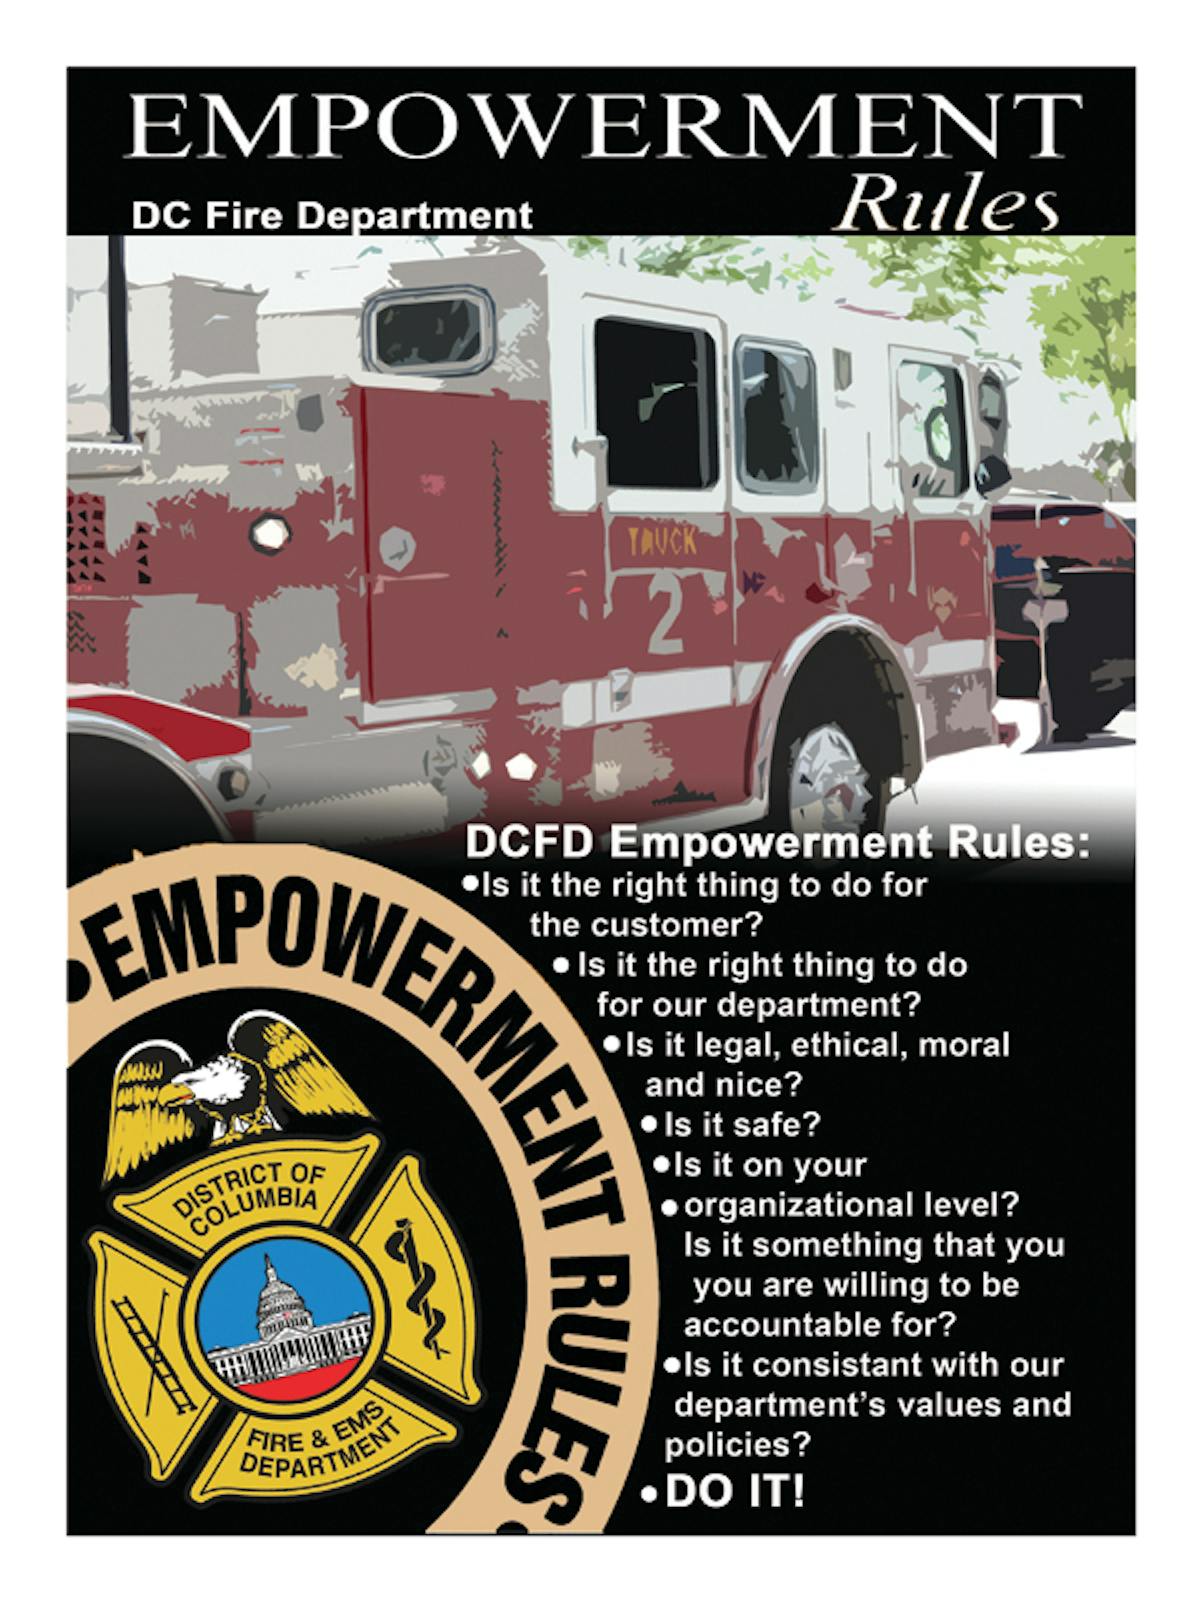 The District of Columbia Fire Department&rsquo;s &ldquo;Empowerment Rules&rdquo; for members asks, &ldquo;Is it legal, ethical, moral and nice?&rdquo;